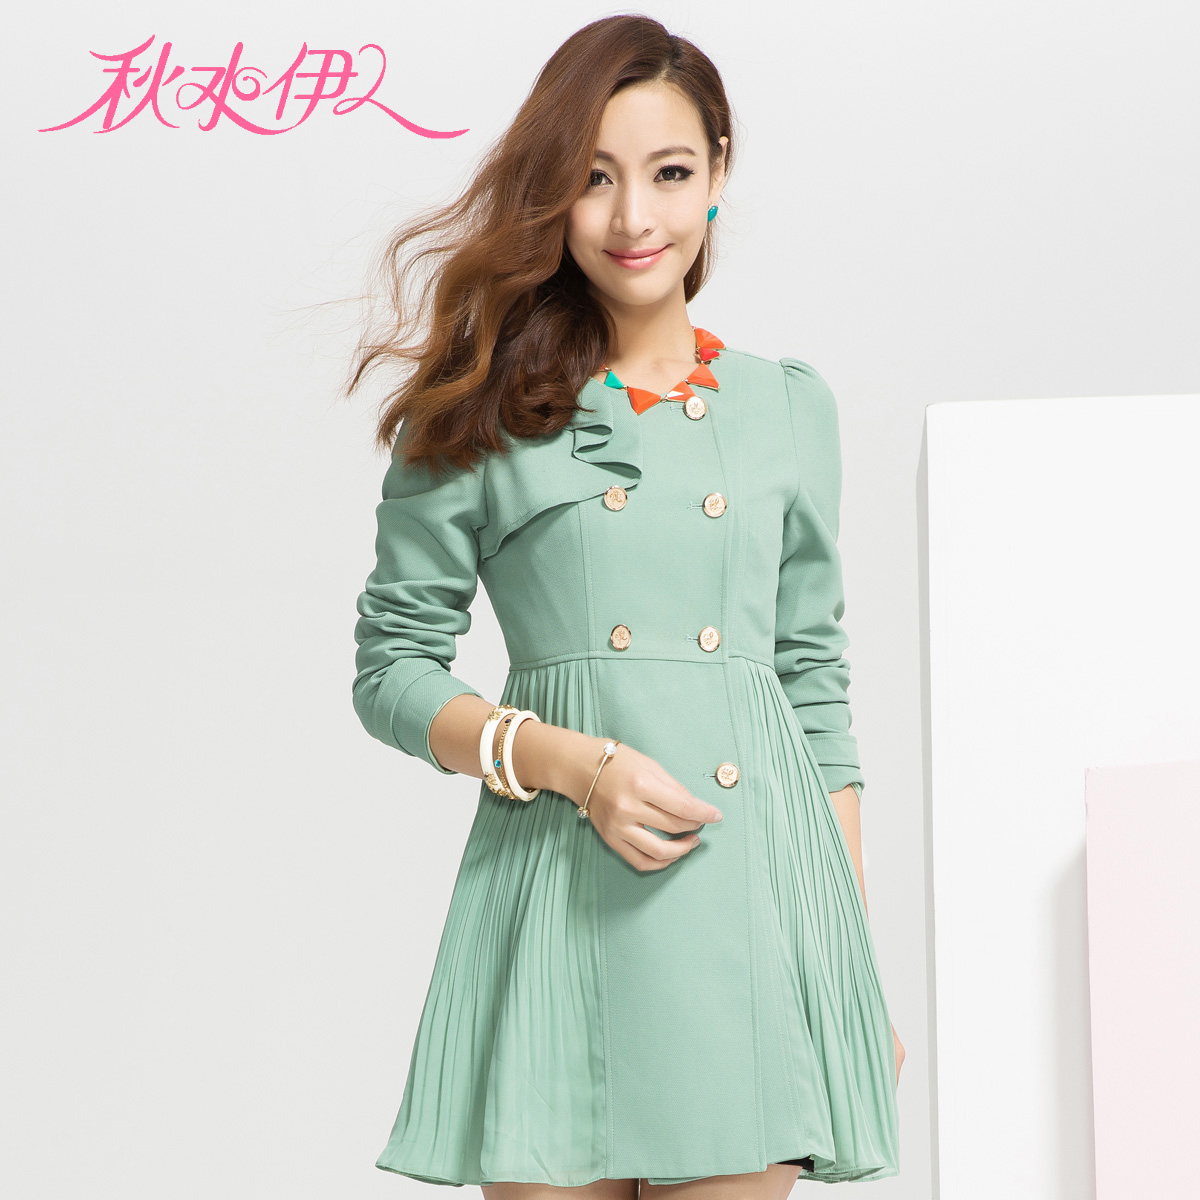 QIUSHUIYIREN 2013 spring new arrival elegant accordion patchwork double breasted slim trench